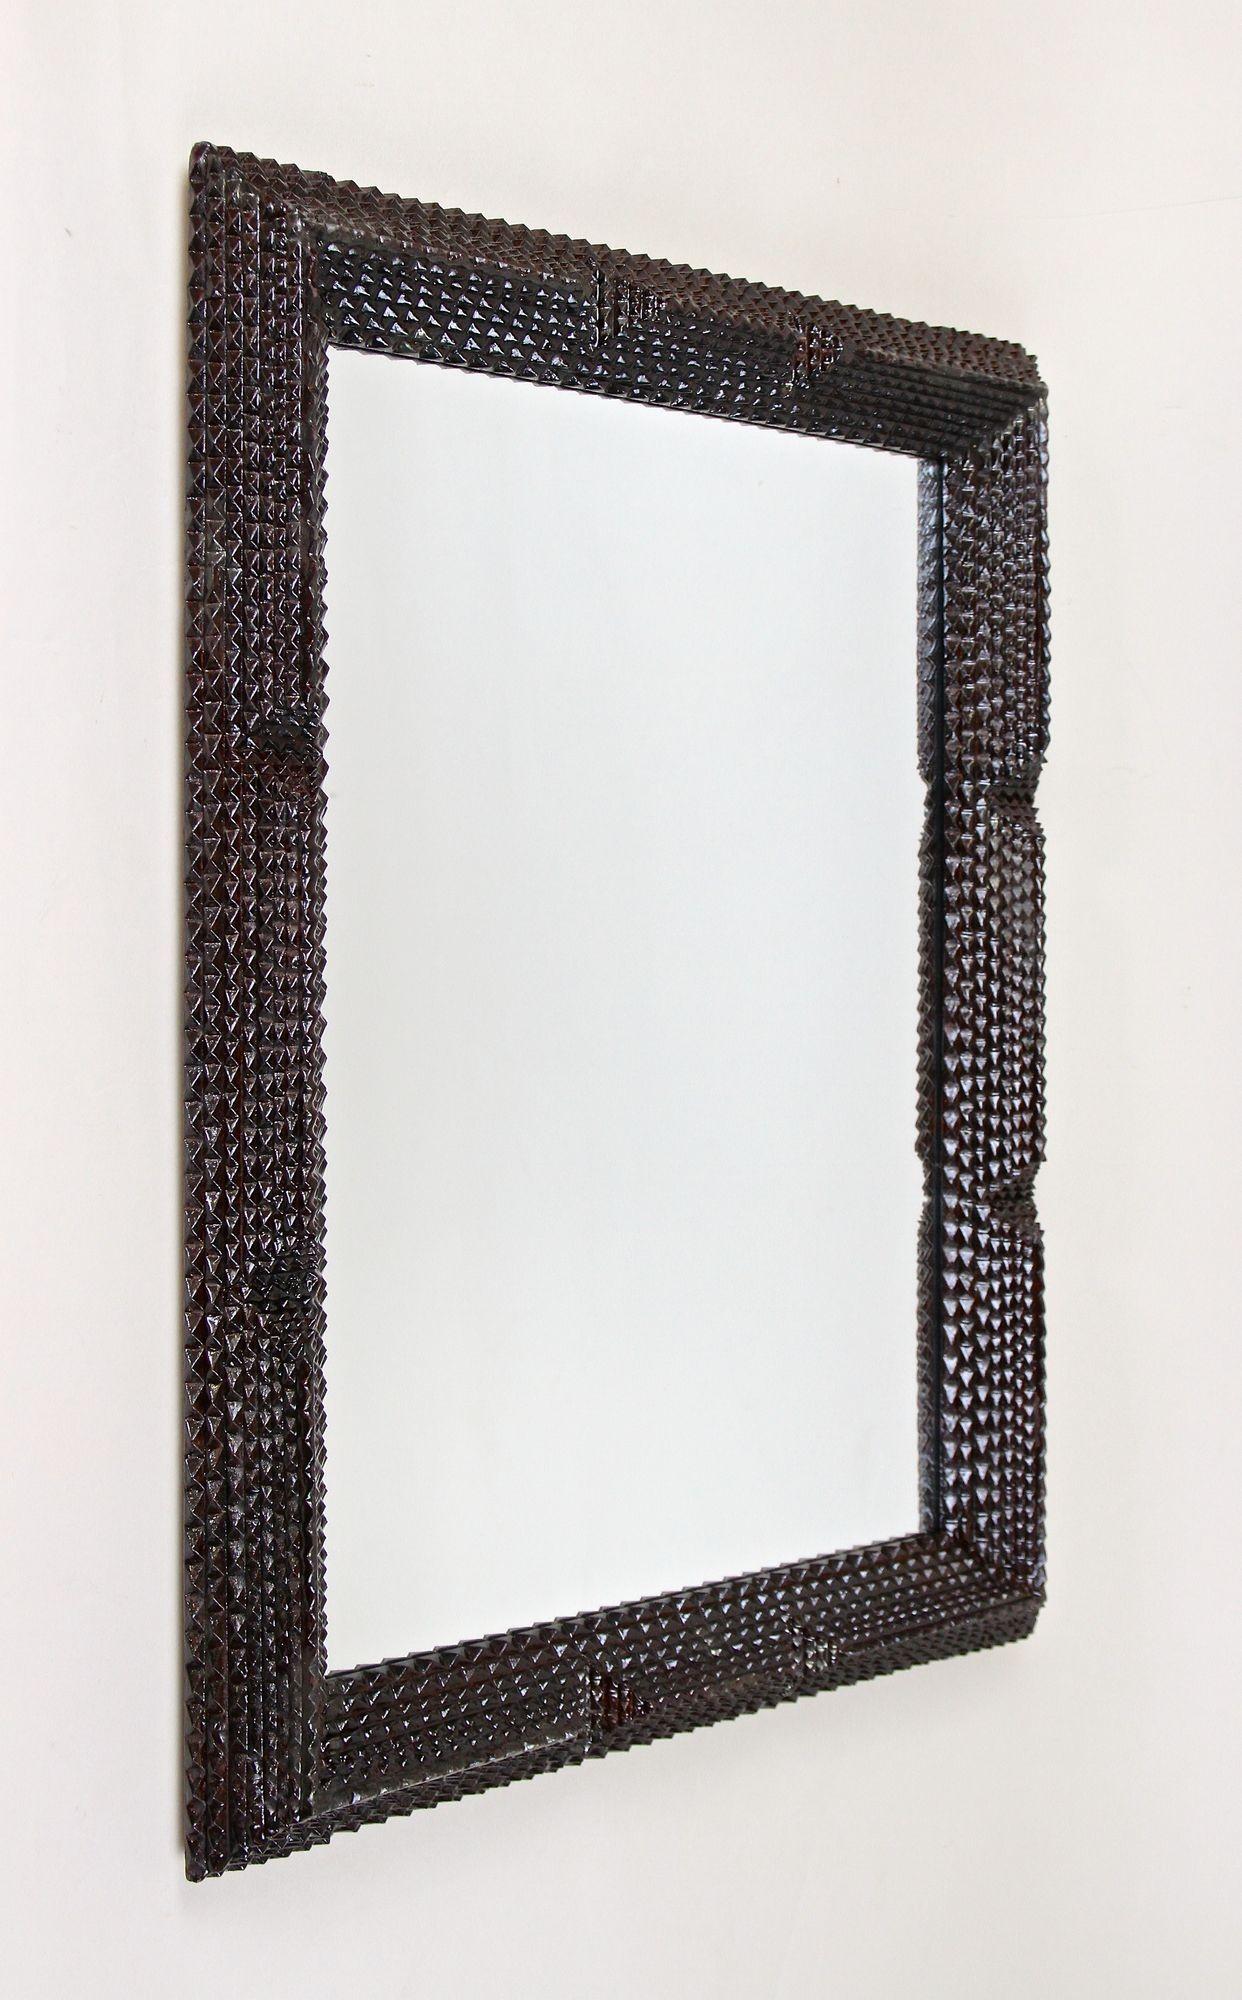 Outstanding hand carved rustic Tramp Art wall mirror from the late 19th century period in Austria. Elaborately crafted out of fine basswood around 1880, the extra broad frame impresses with its artfully pyramid notch cut design, additionally adorned